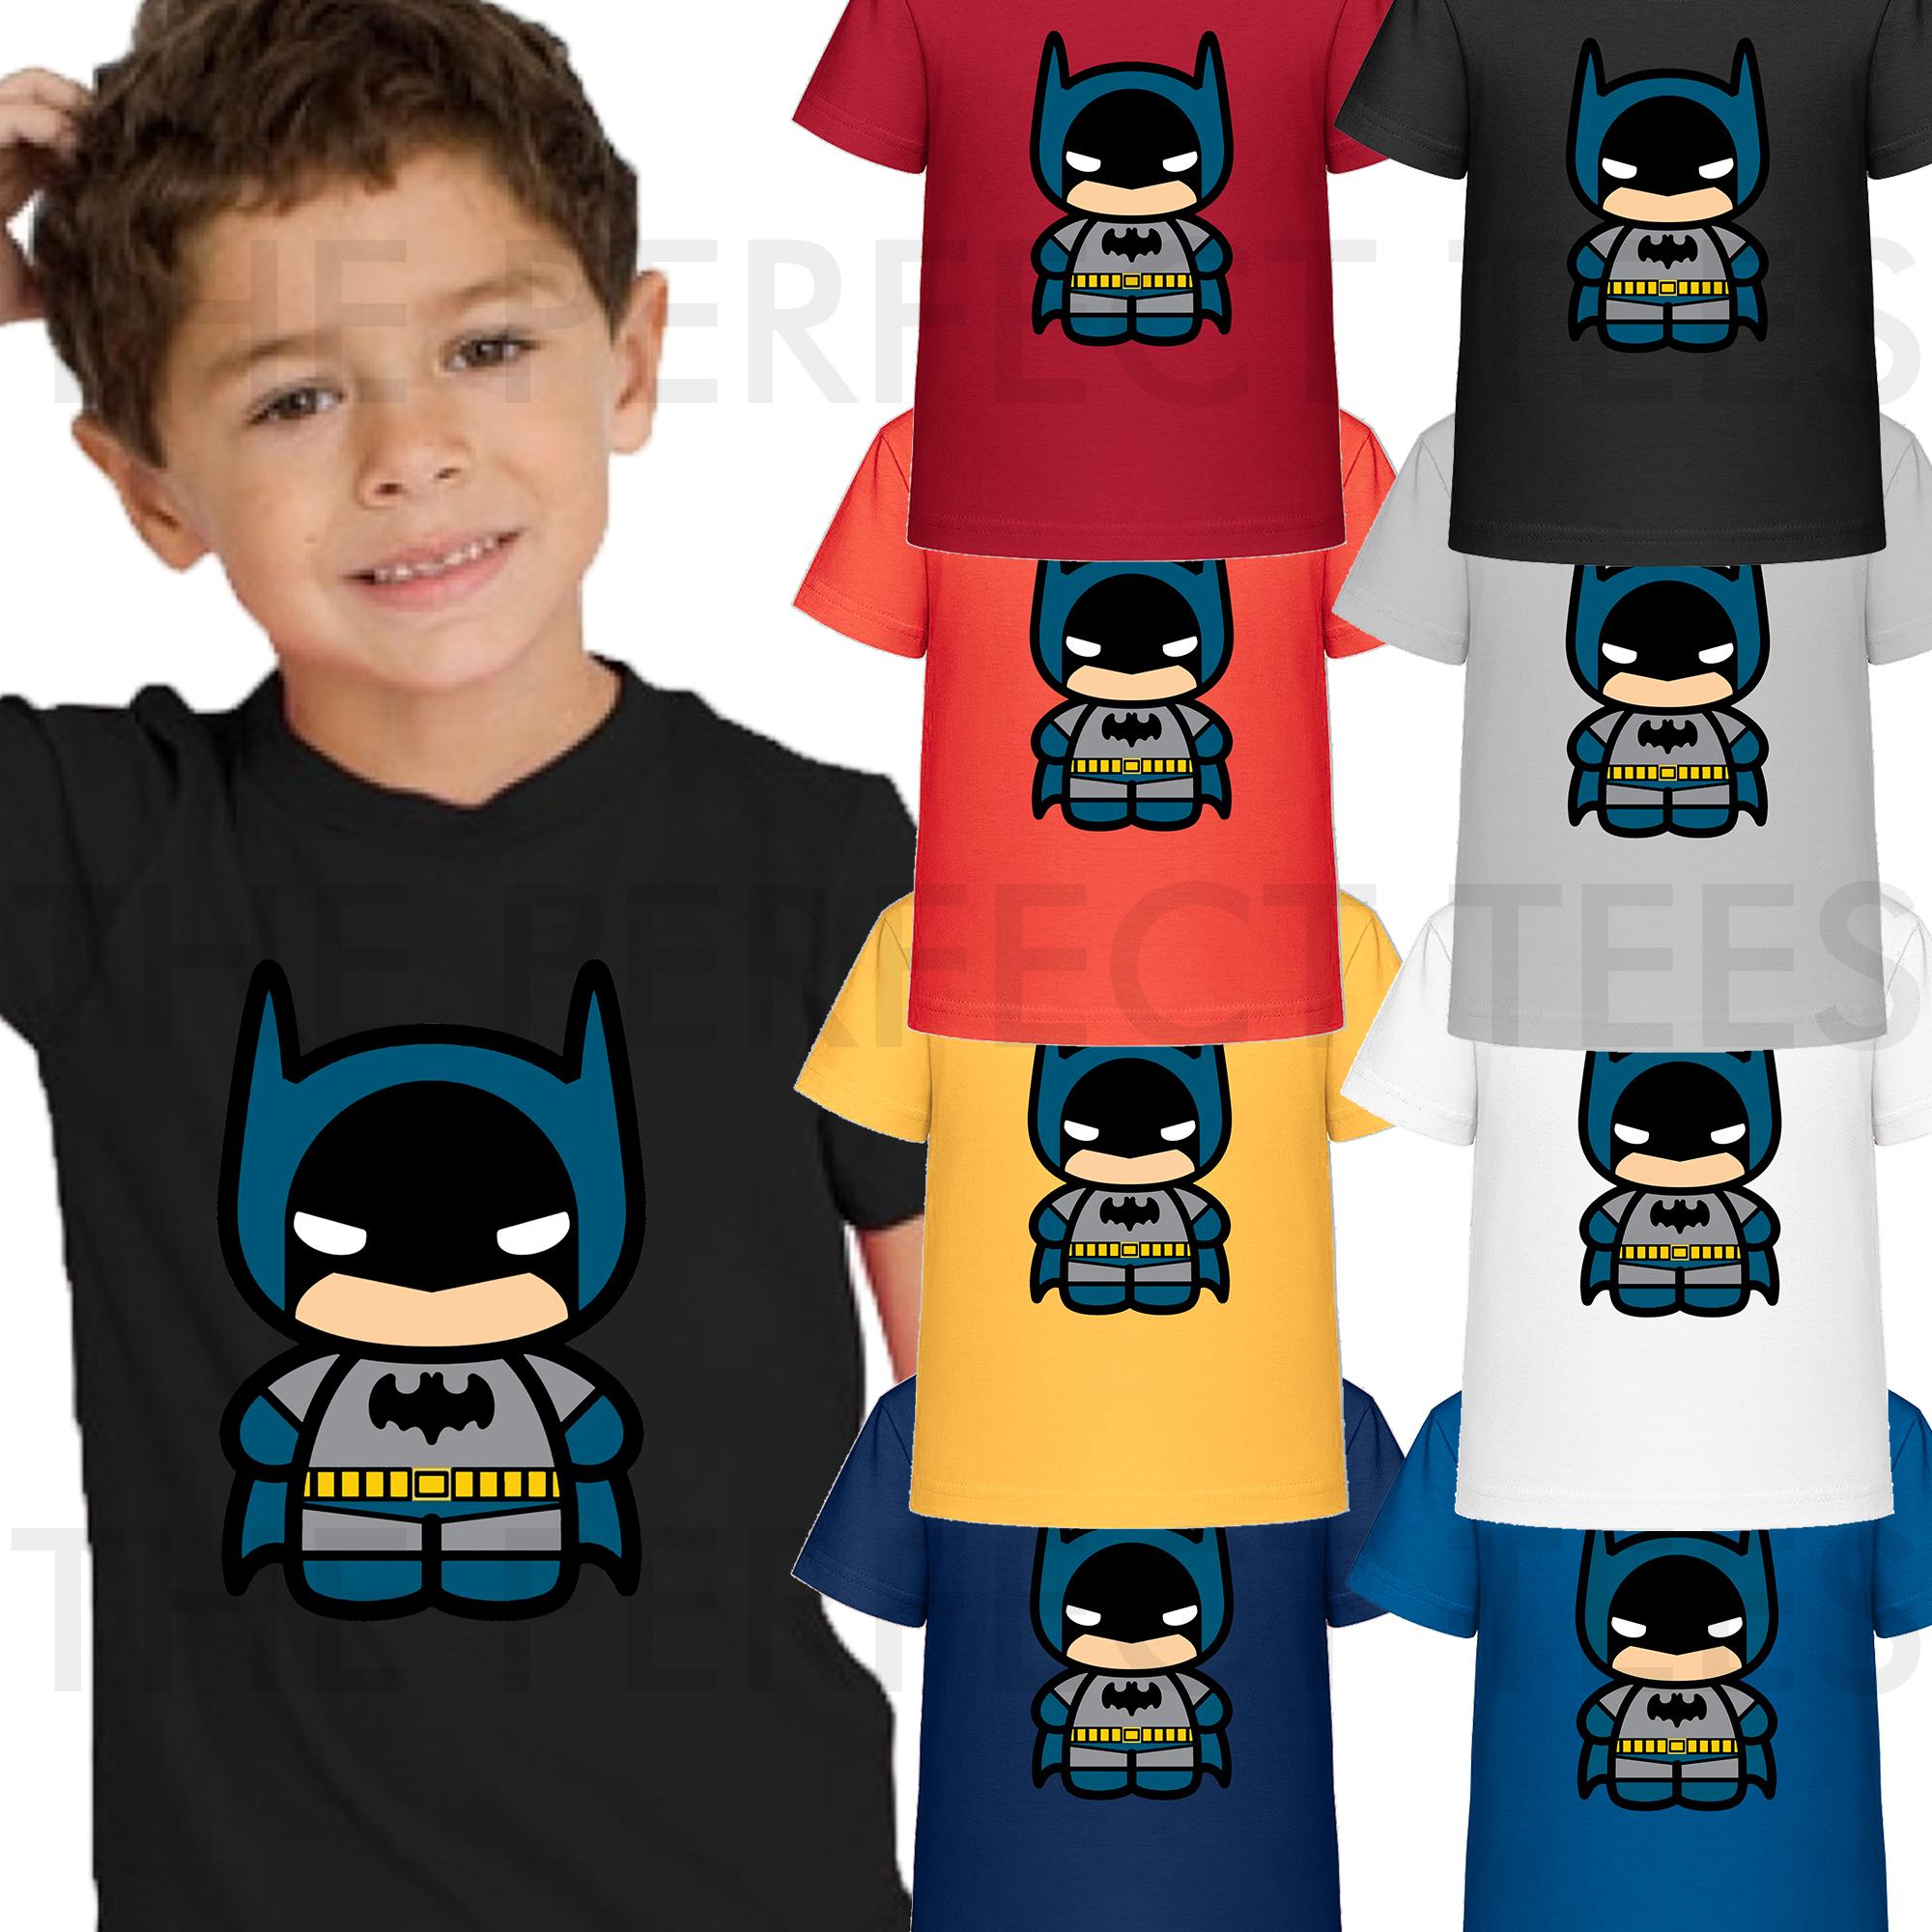 Boys Shirts For Sale T Shirts For Boys Online For Sale With Great Prices Deals Lazada Com Ph - 4 13yrs girls boys game roblox t shirt kids t shirt child unisex